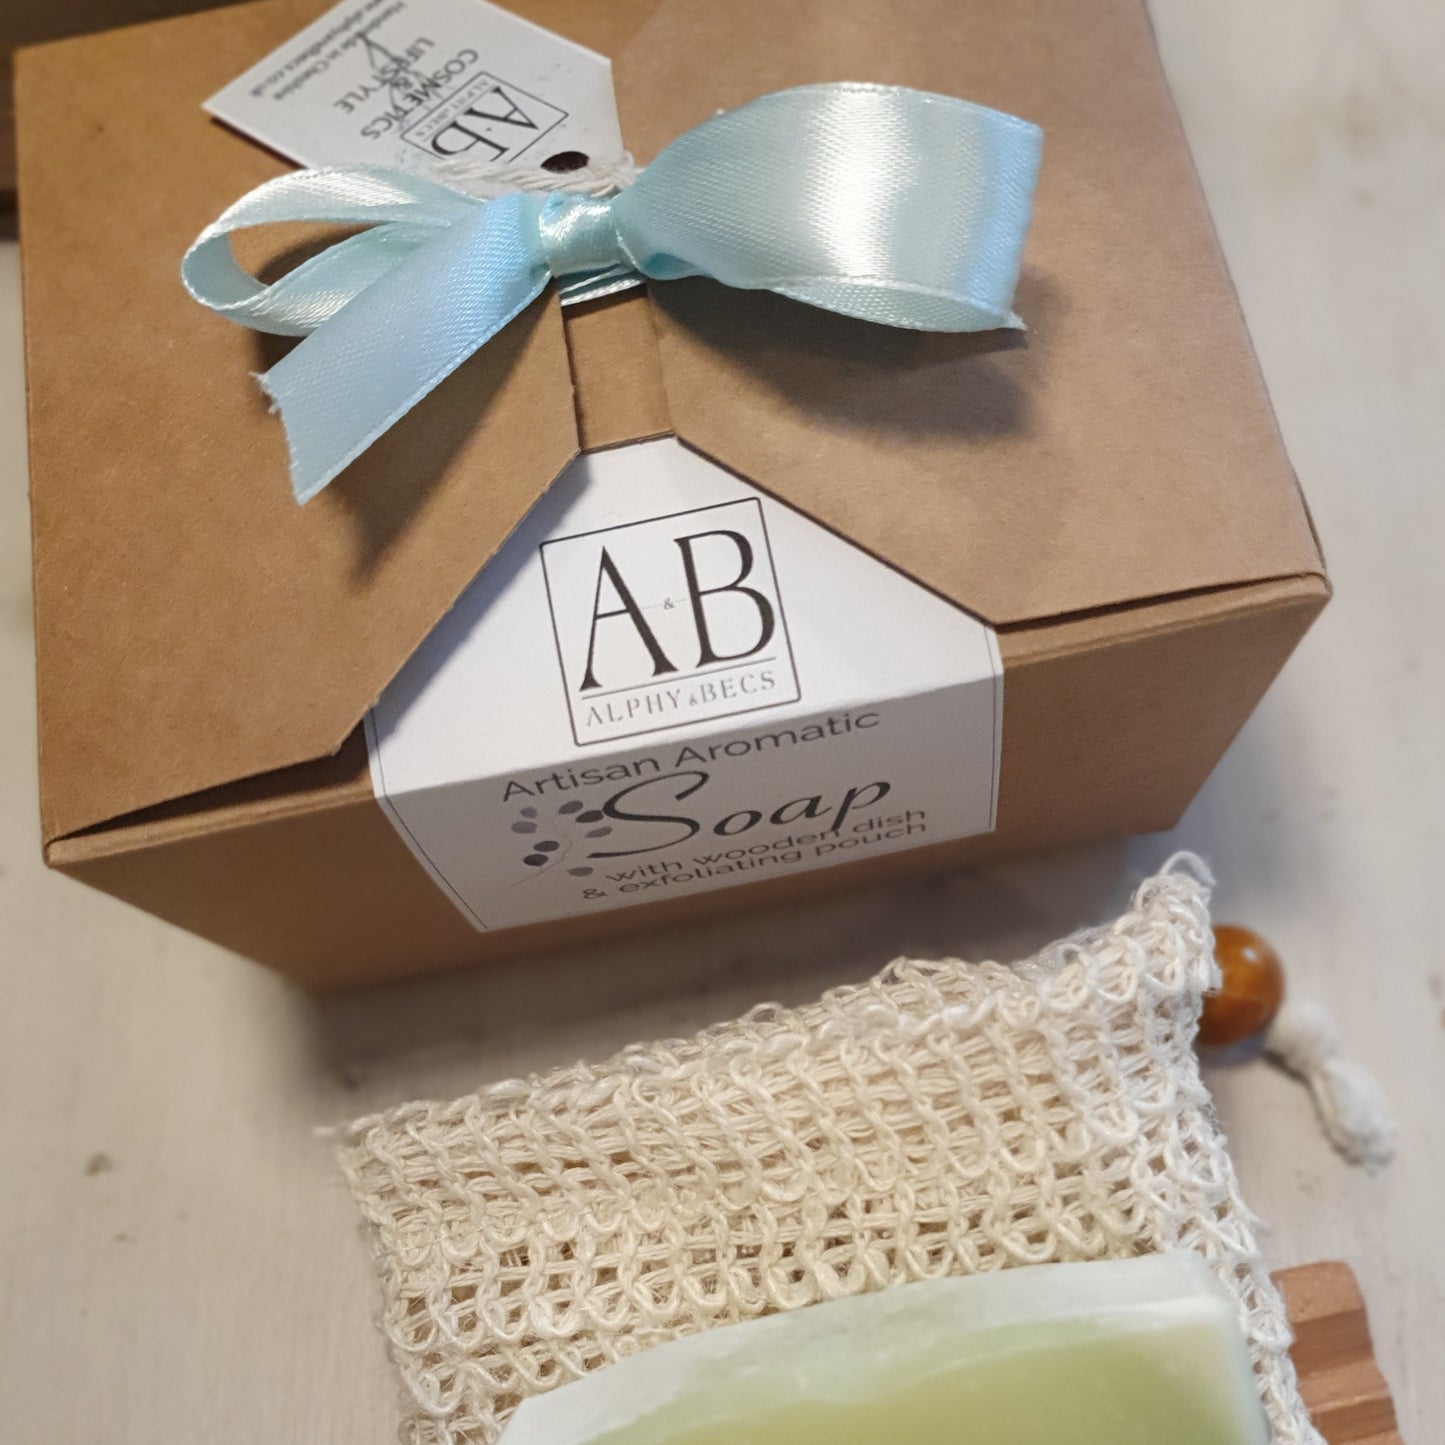 Small Gift Set - Soap with wooden dish & exfoliating pouch